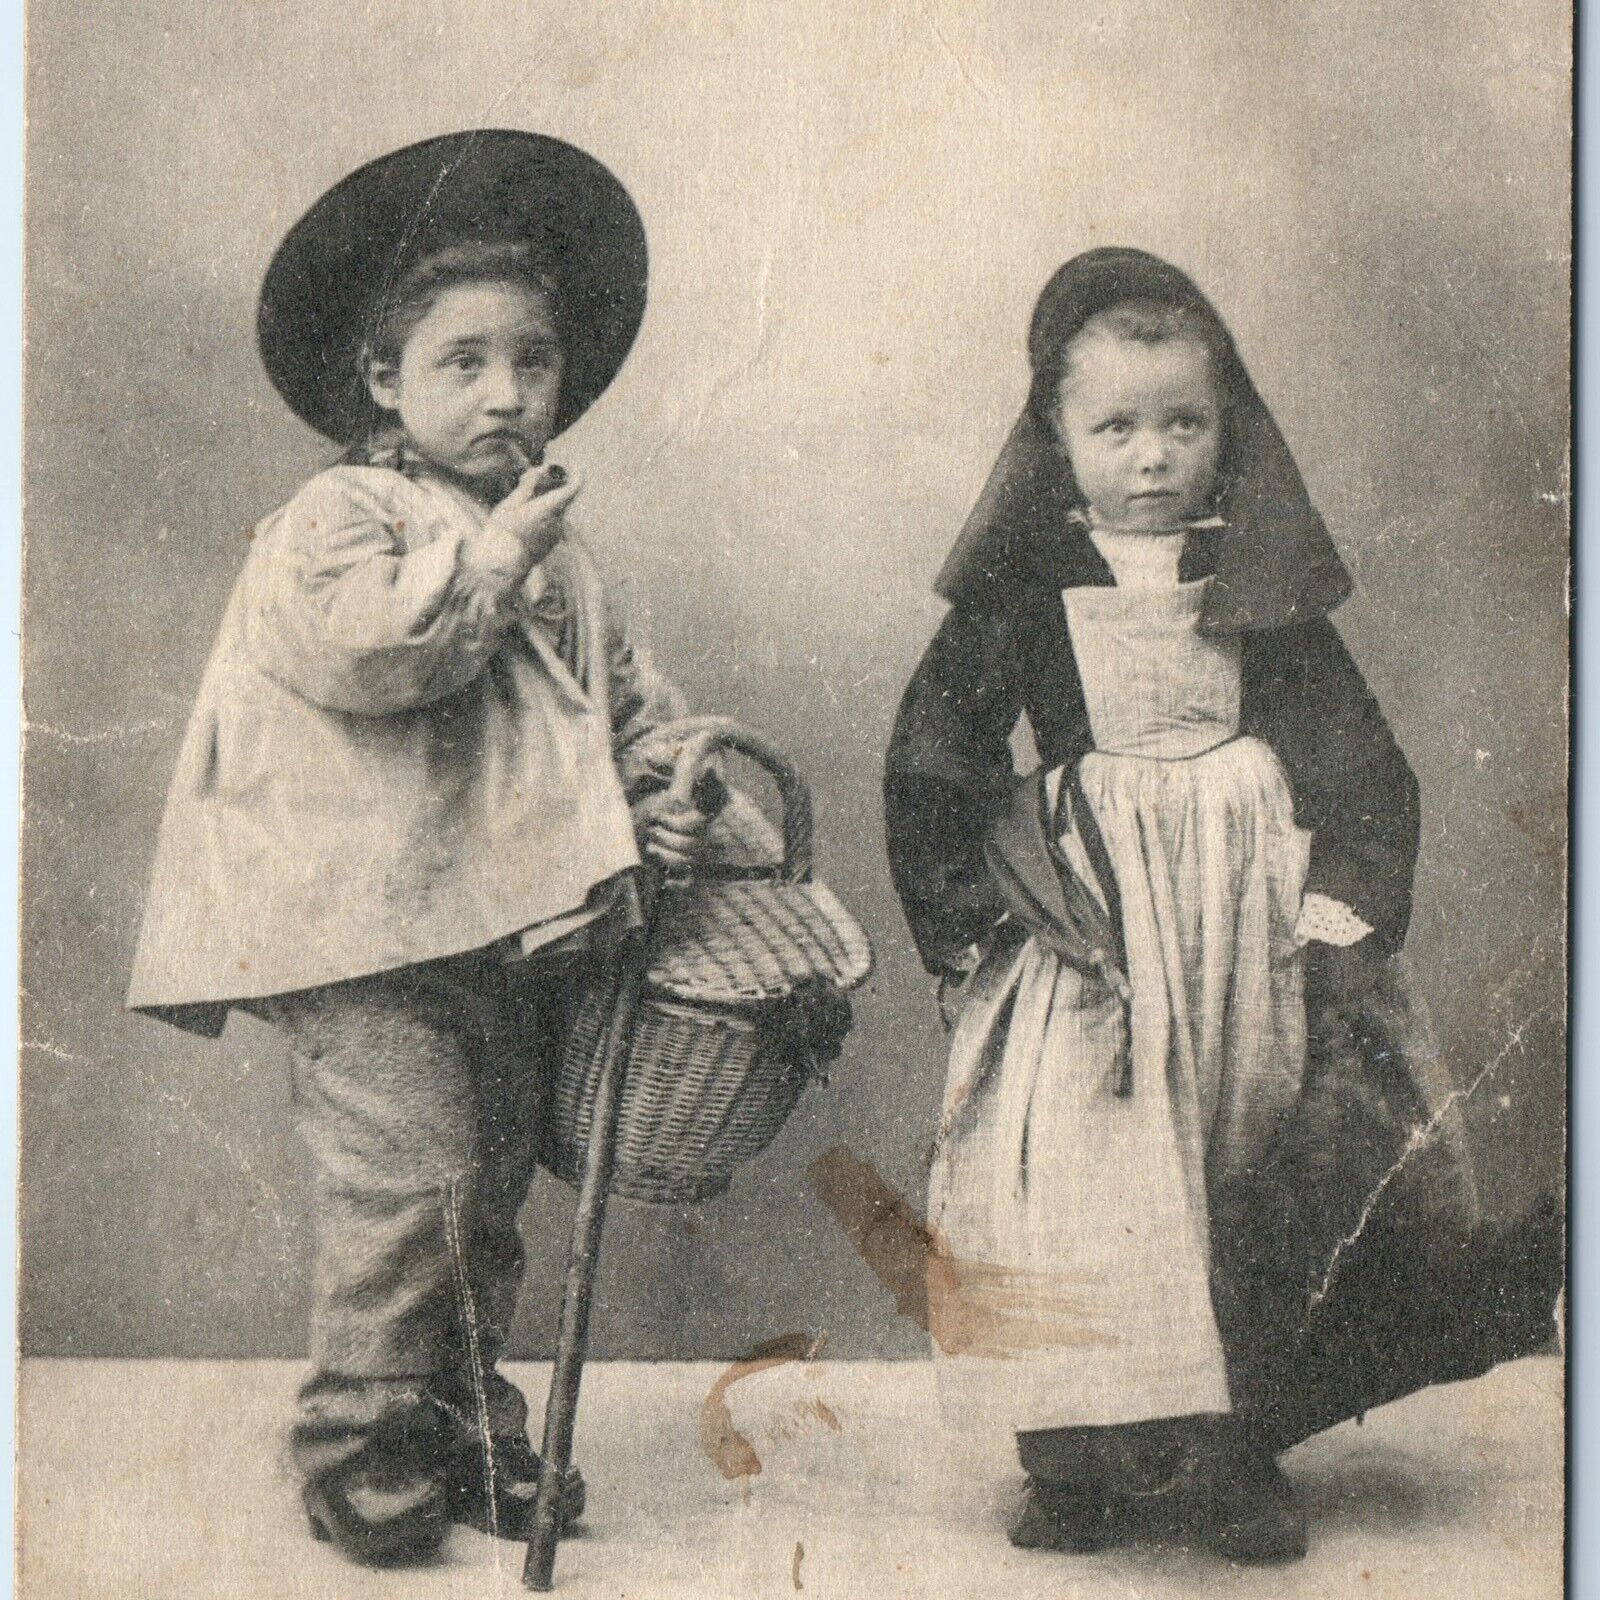 c1910s Children of Pontivy France Mature Kids Pipe Smoking Boy Cute Girl PC A172